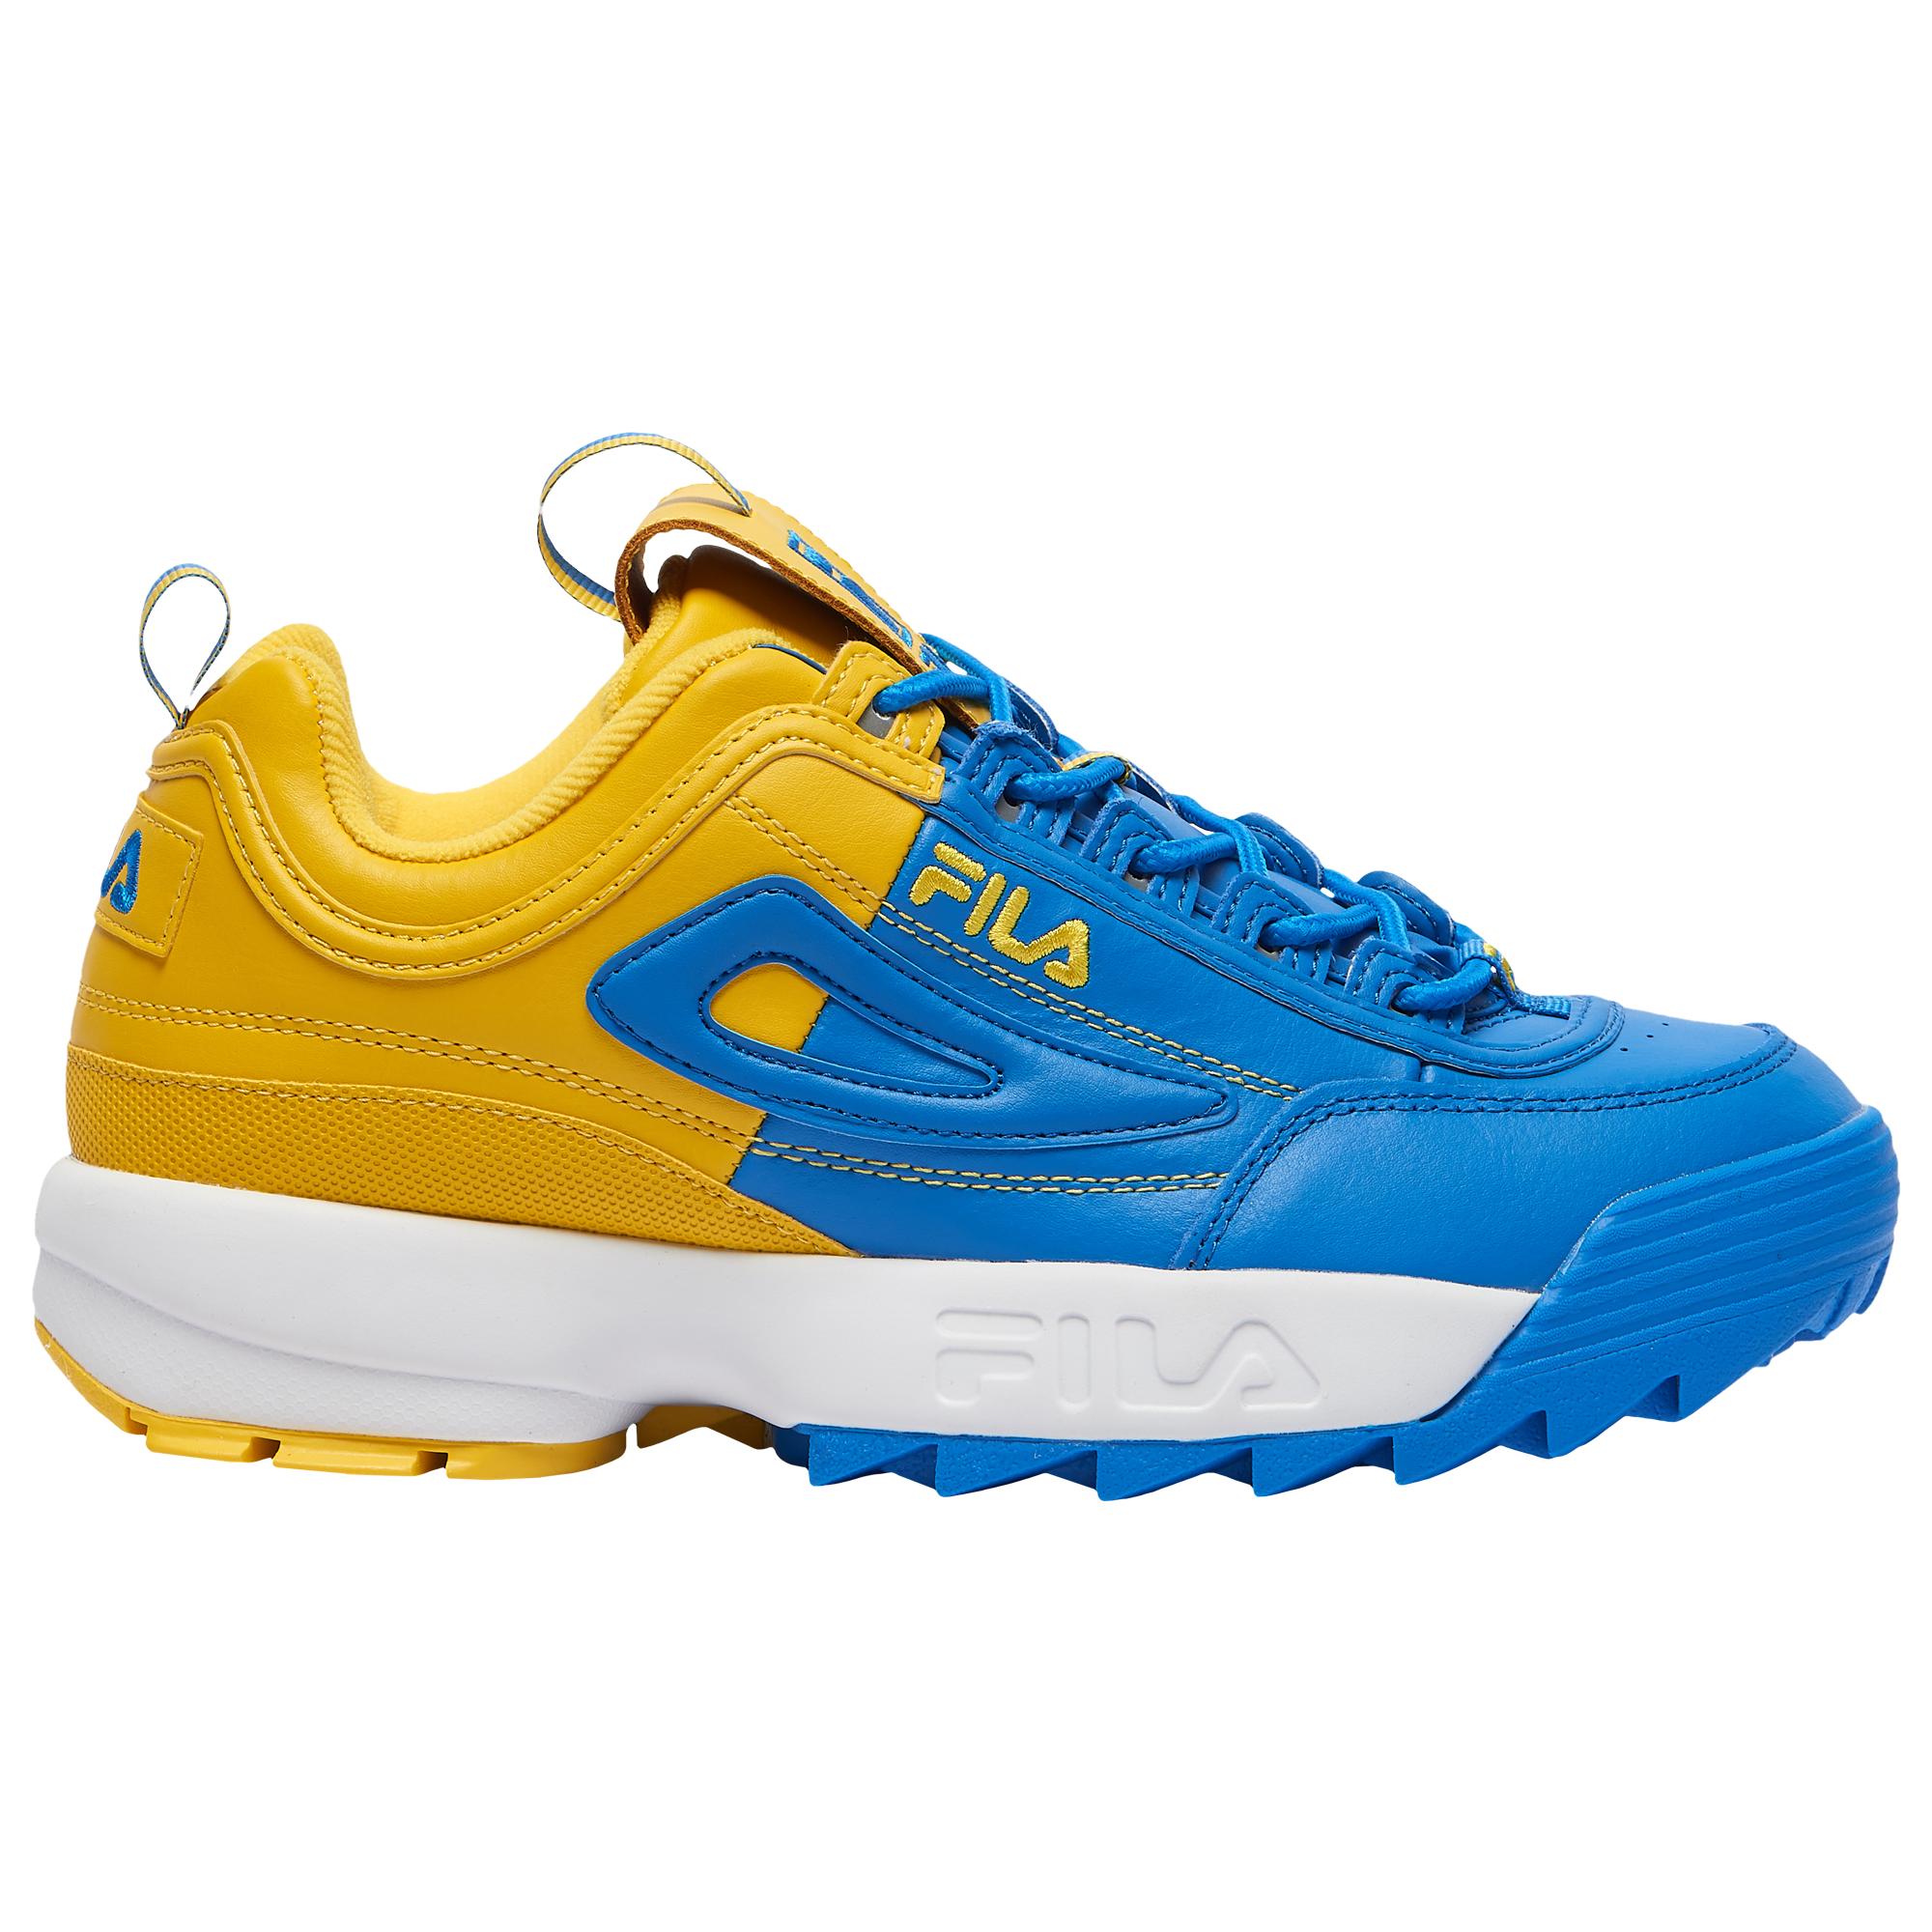 yellow and blue fila shoes